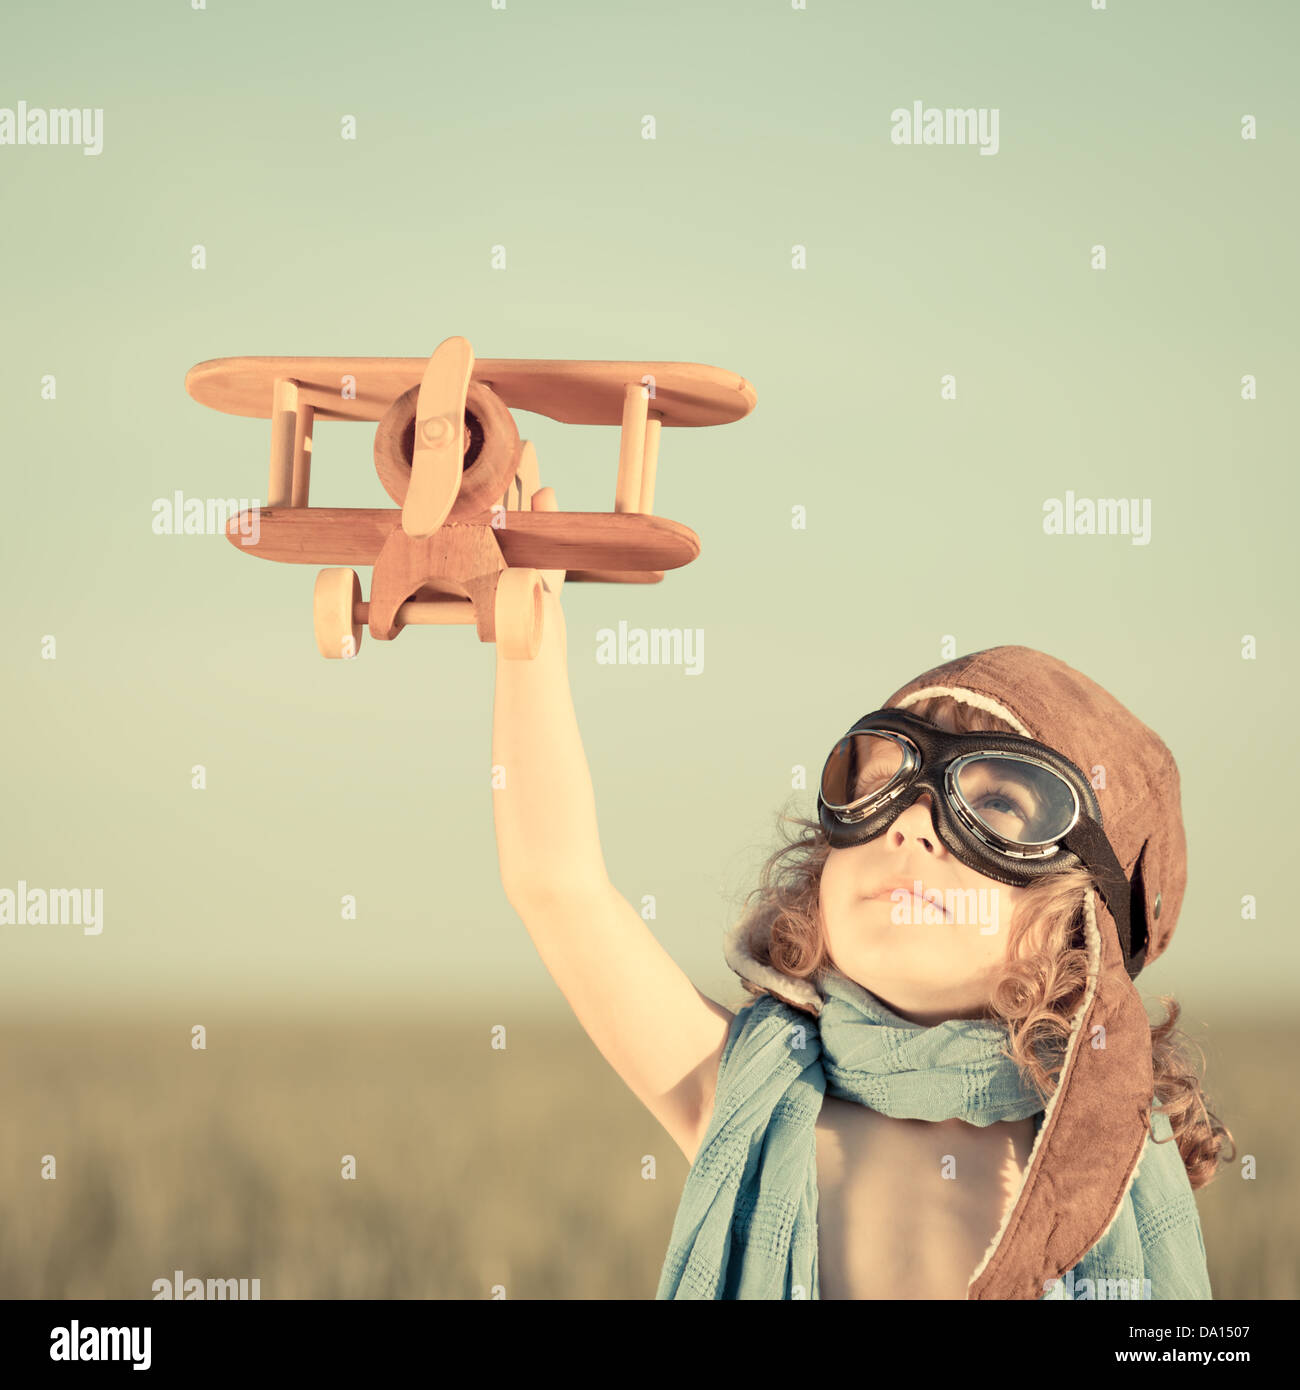 Happy kid playing with toy airplane against blue summer sky background. Stock Photo